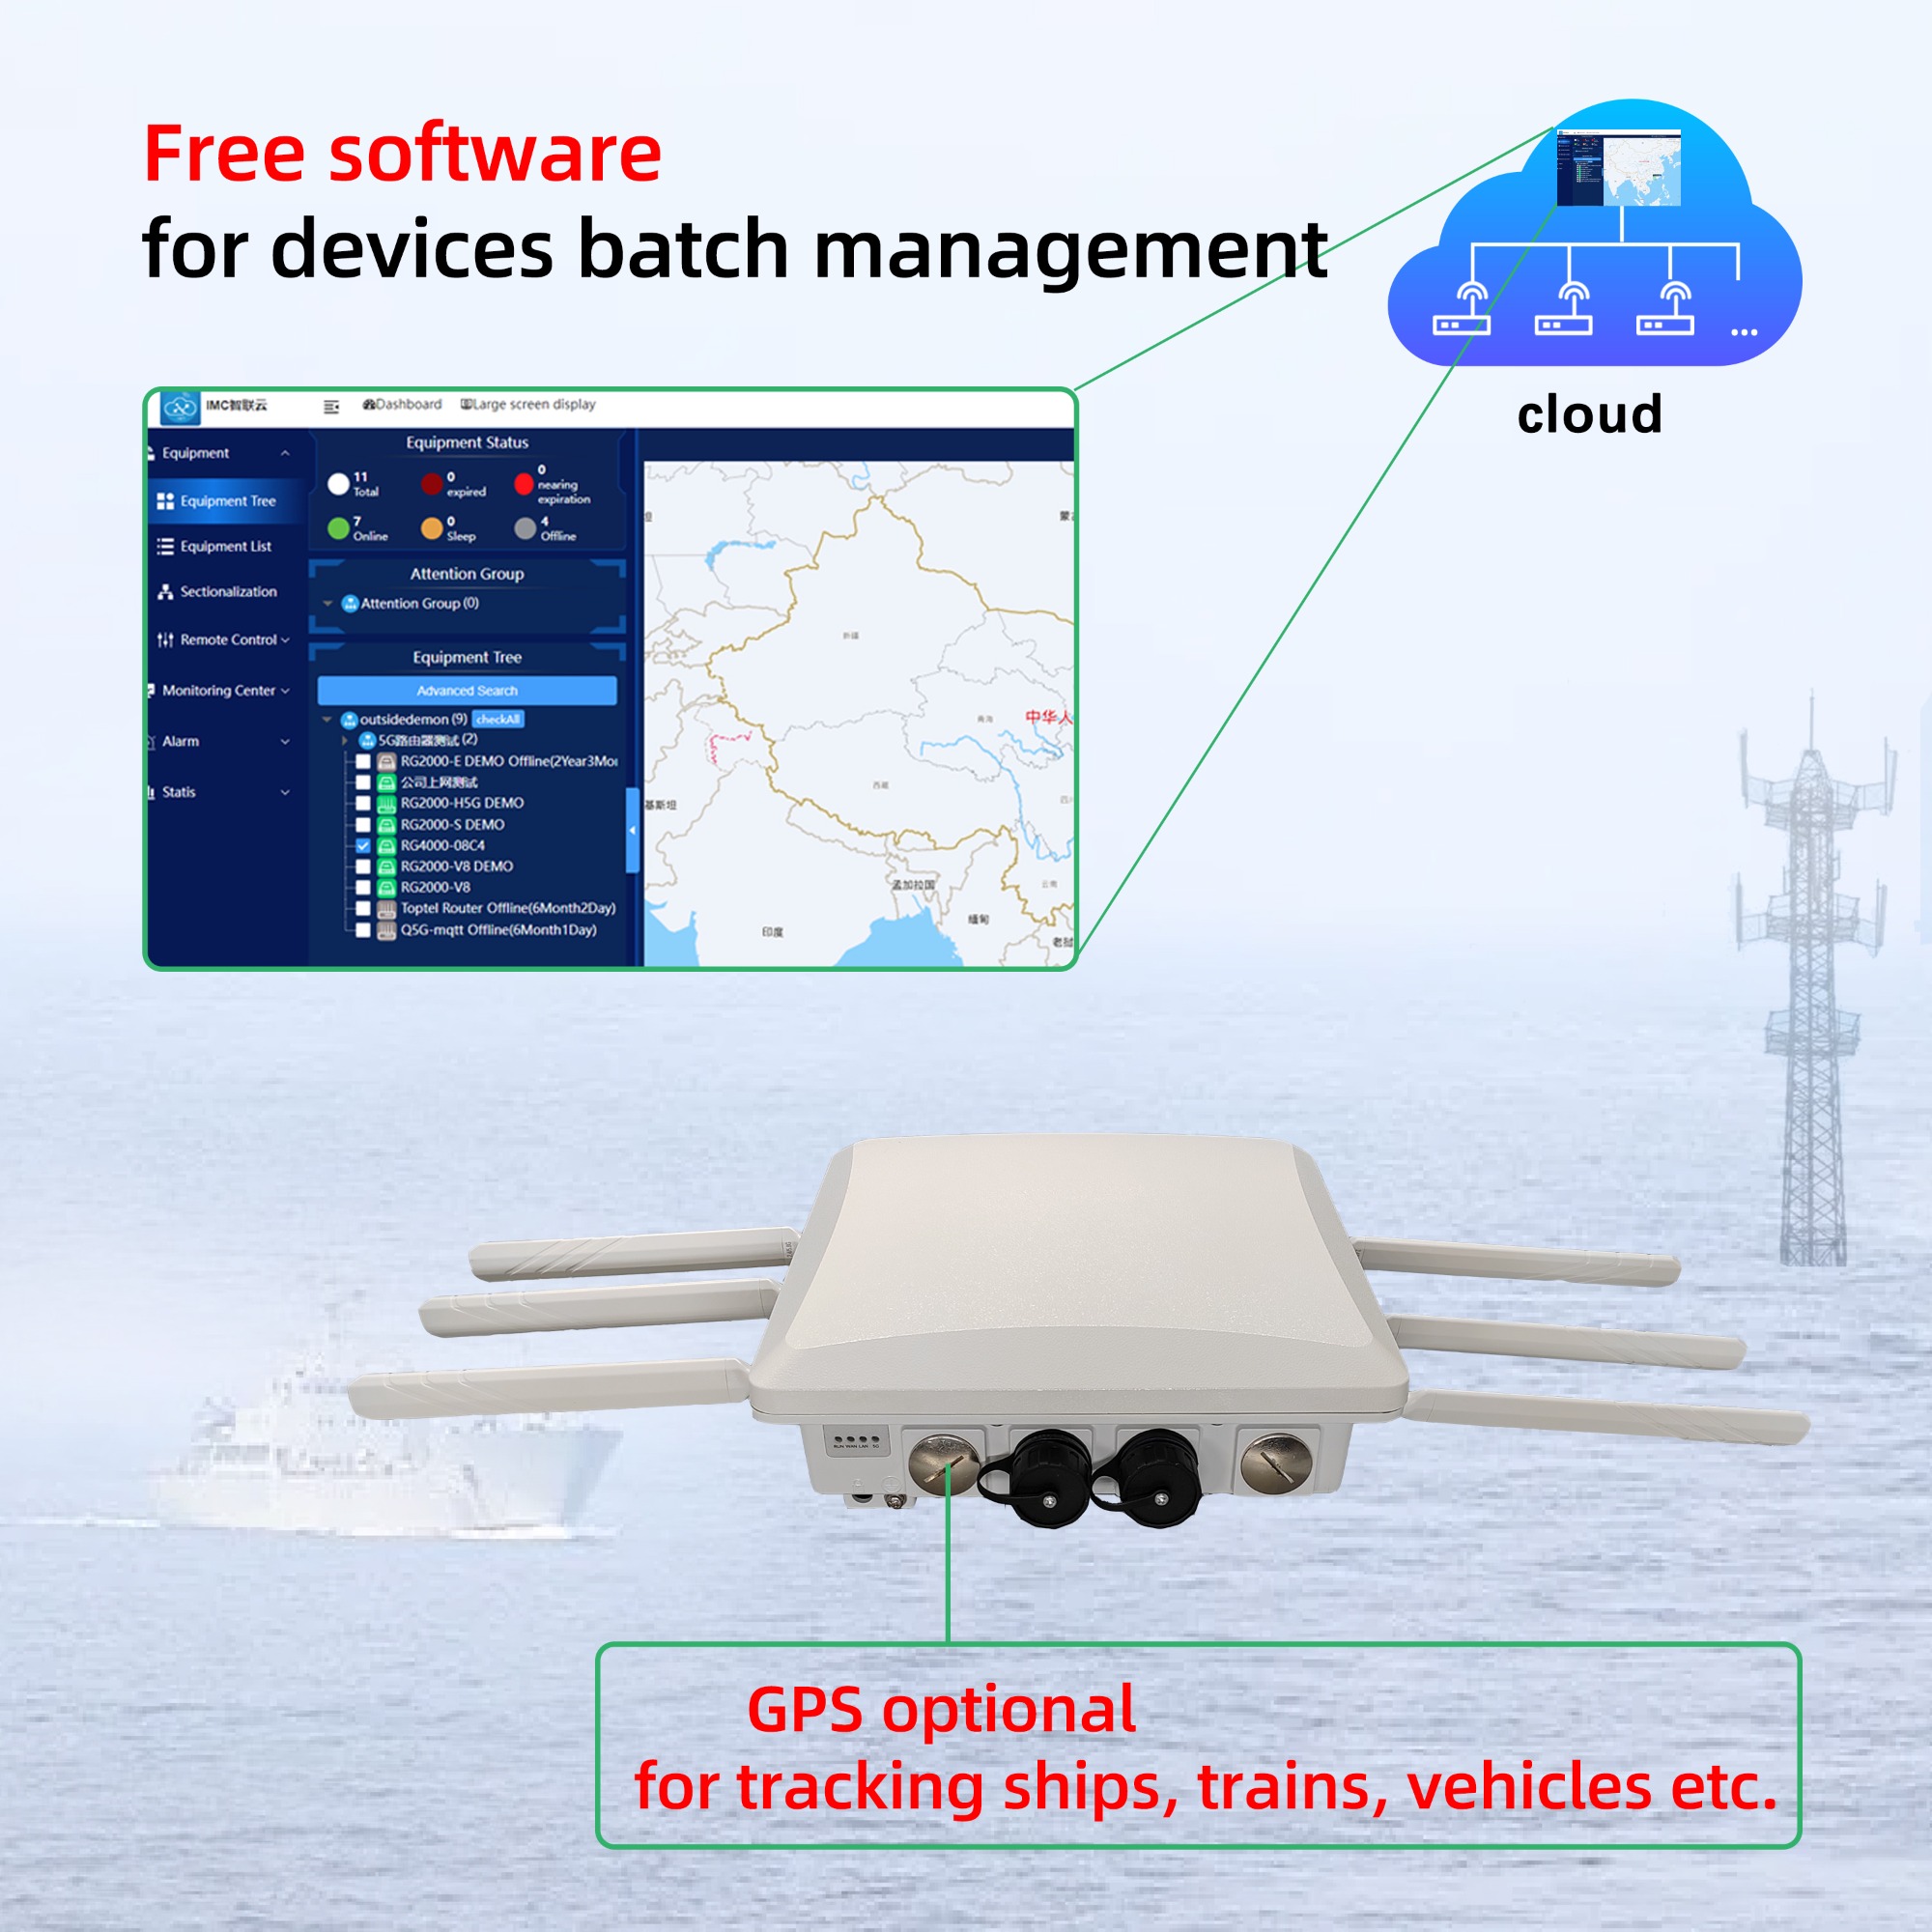 GPS tracking ships Free software for devices management remotely- 5G Industrial Router RG5000-OD 